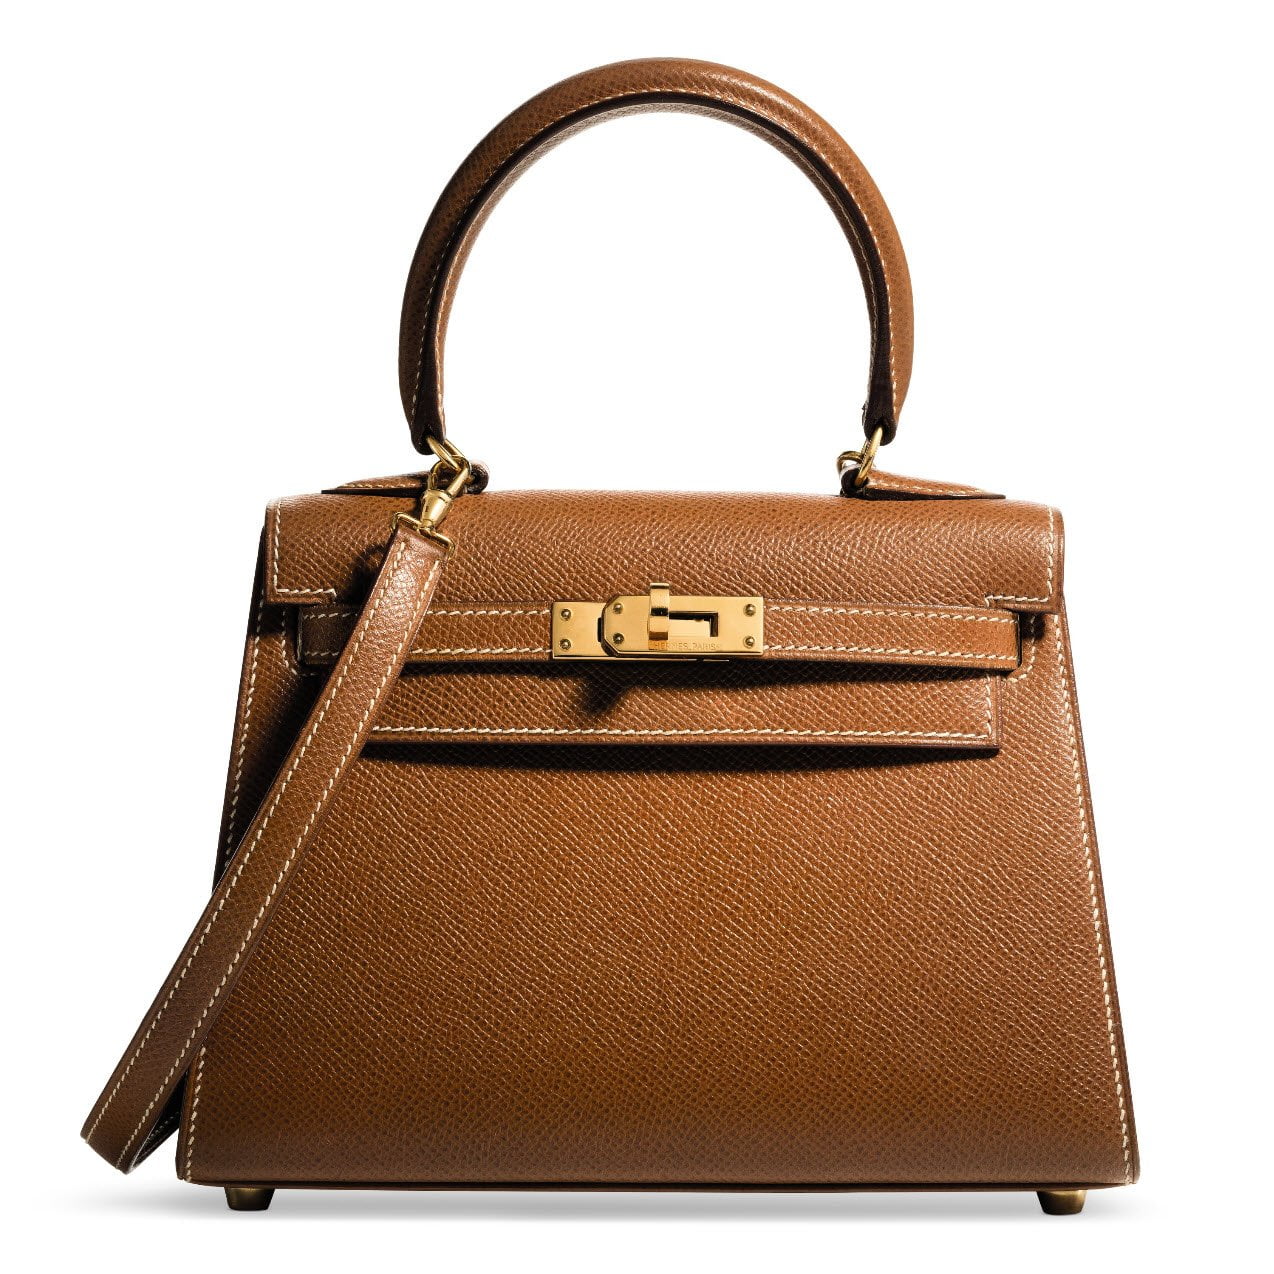 Magnificent Hermès and Chanel Bags: Christie's x What Goes